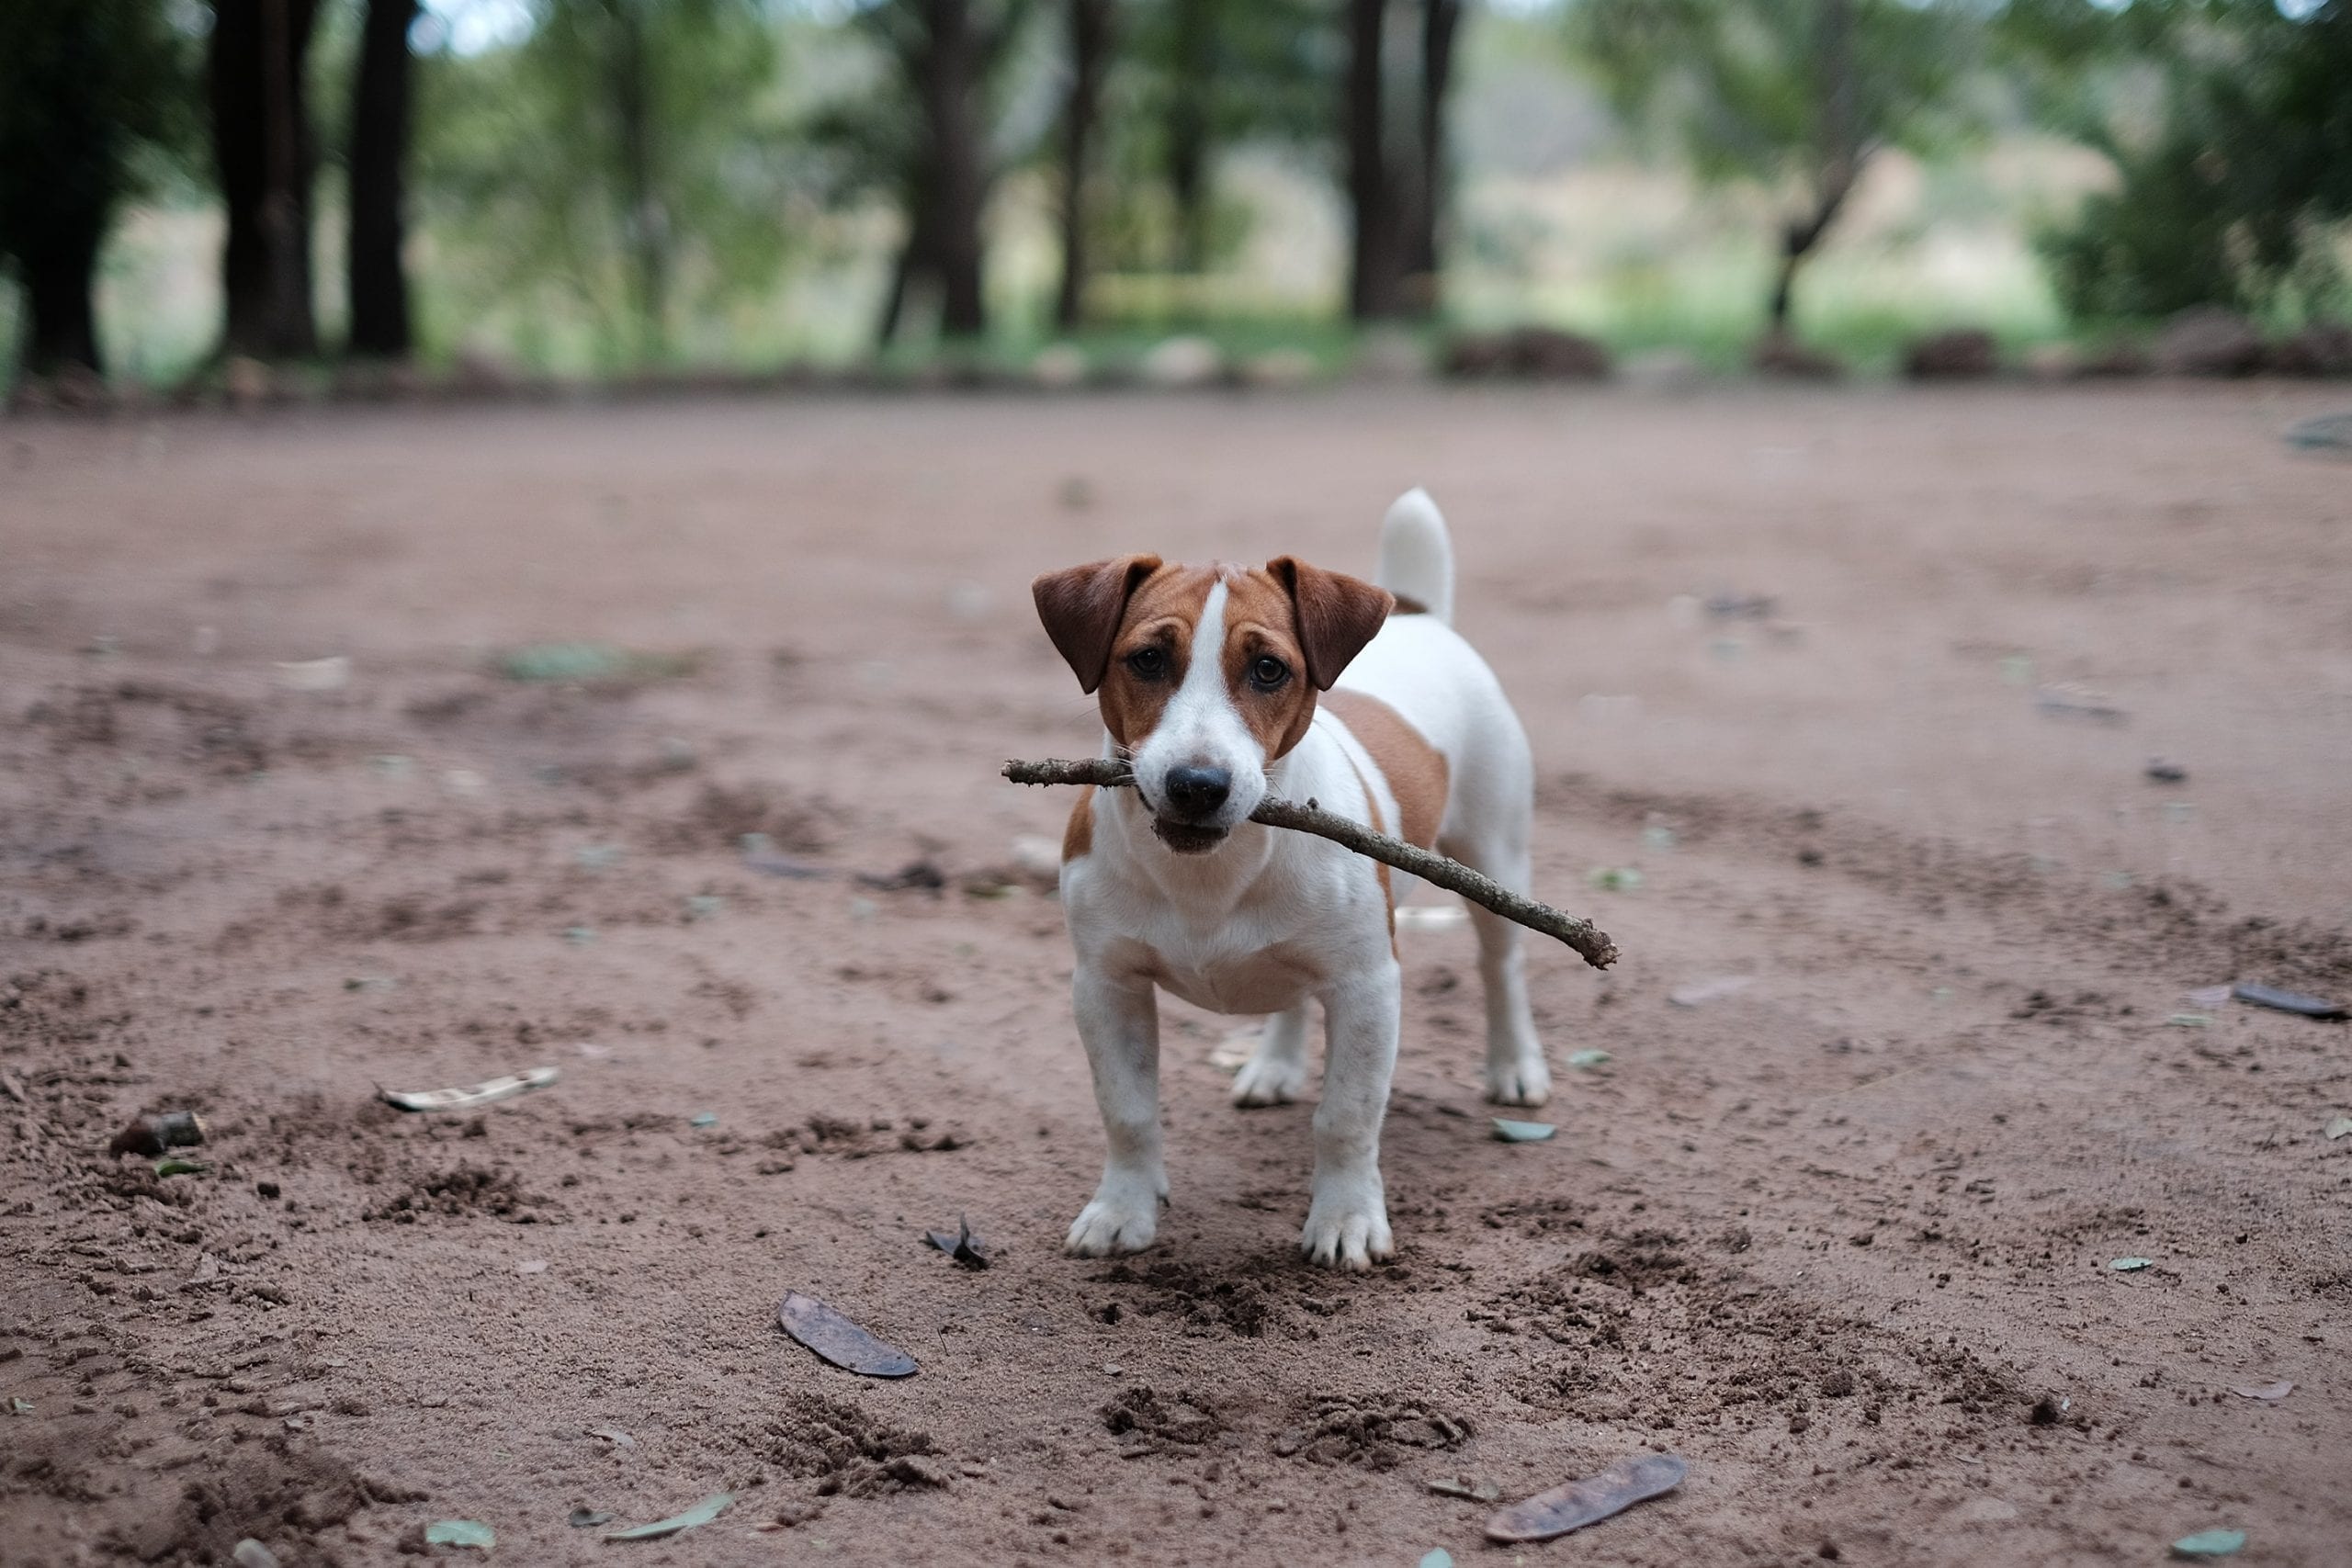 Fun Facts about Jack Russell Dogs